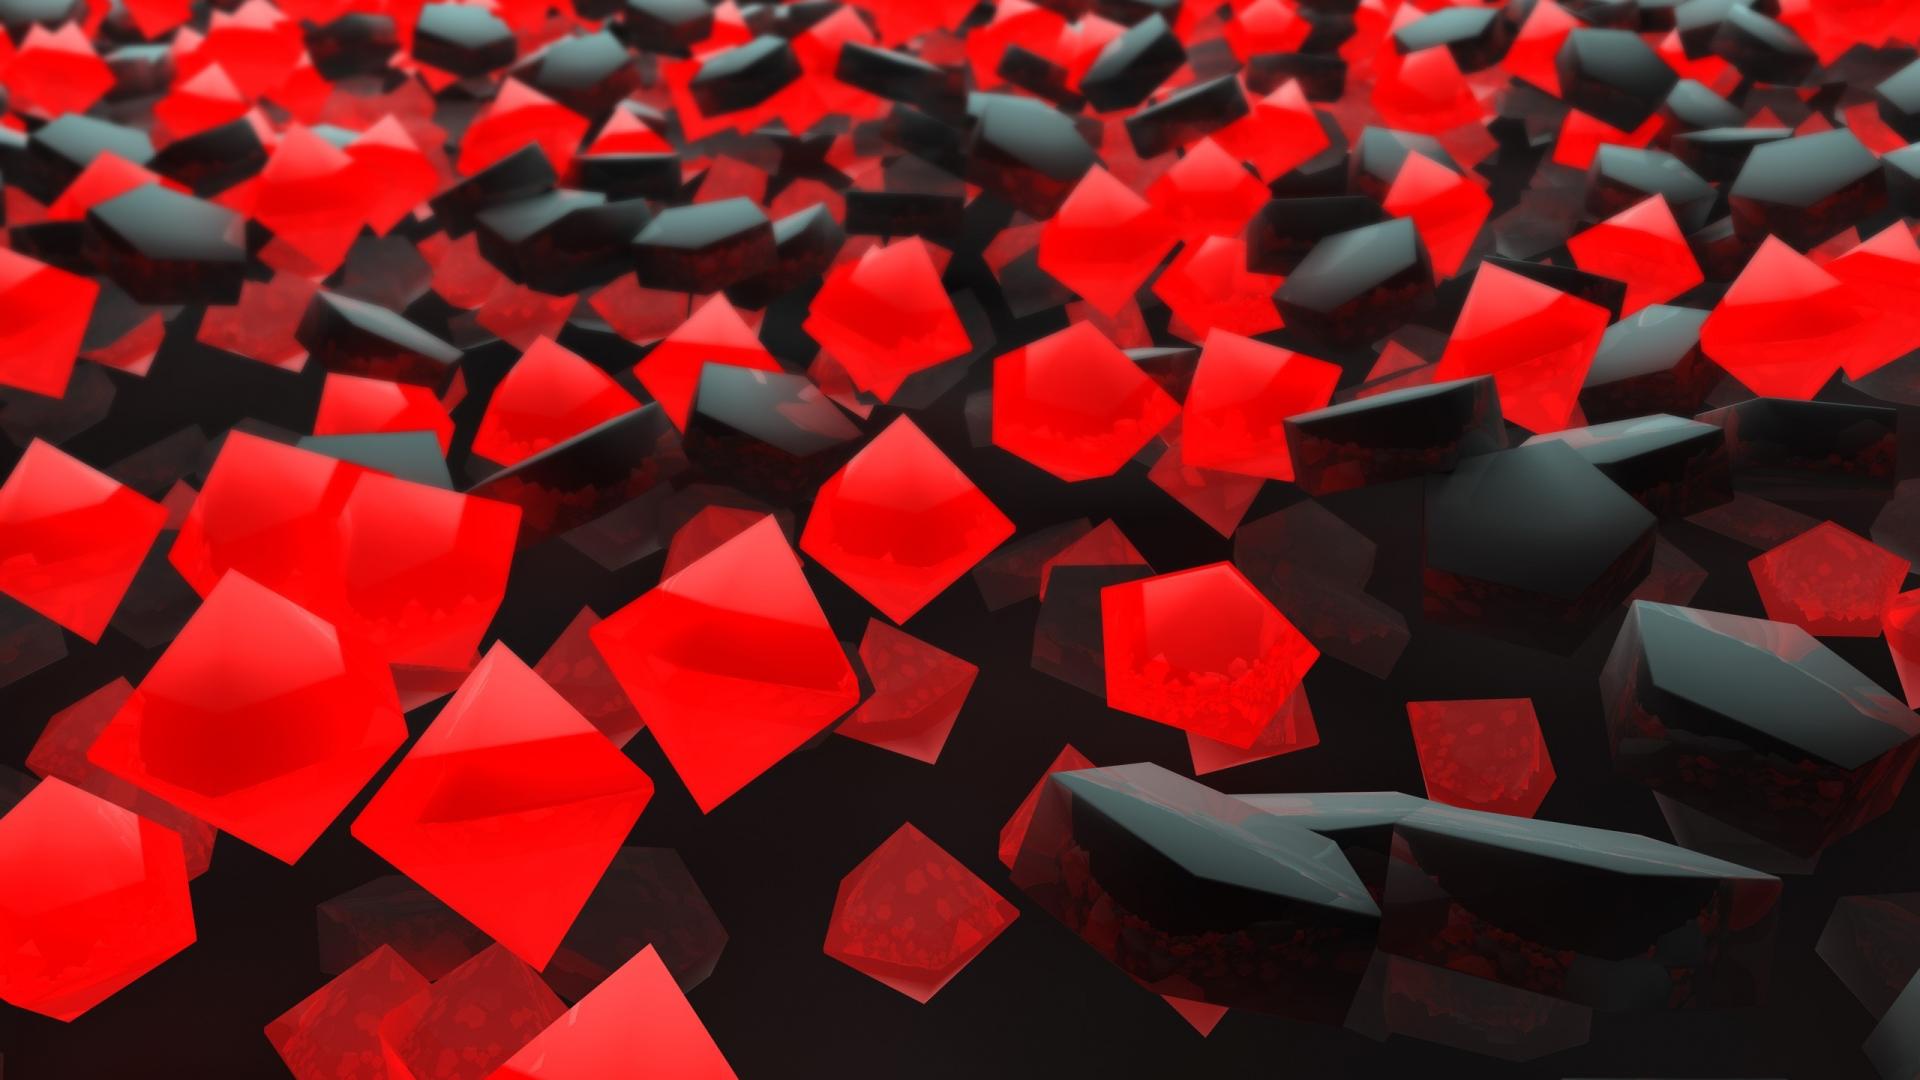 Abstract black red cubes wallpaper | (18828)